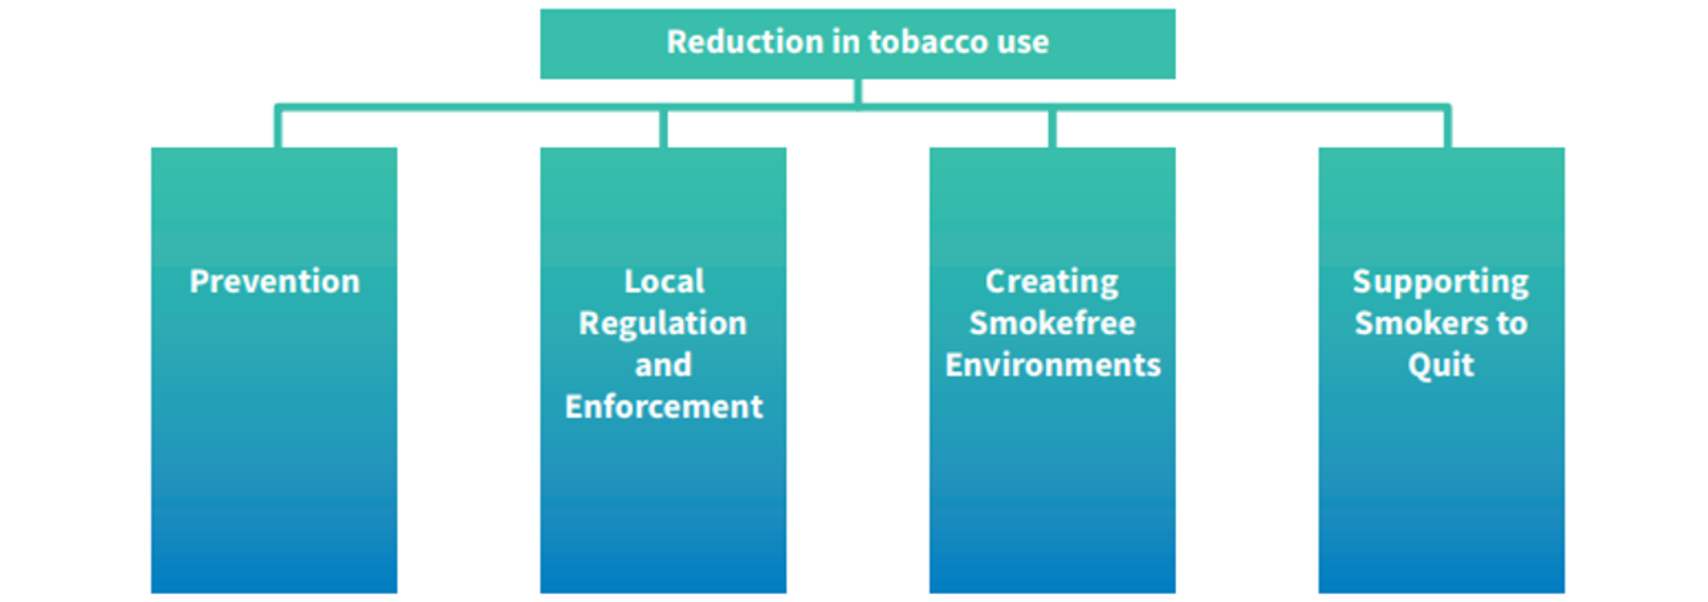 Reduction in tobacco use